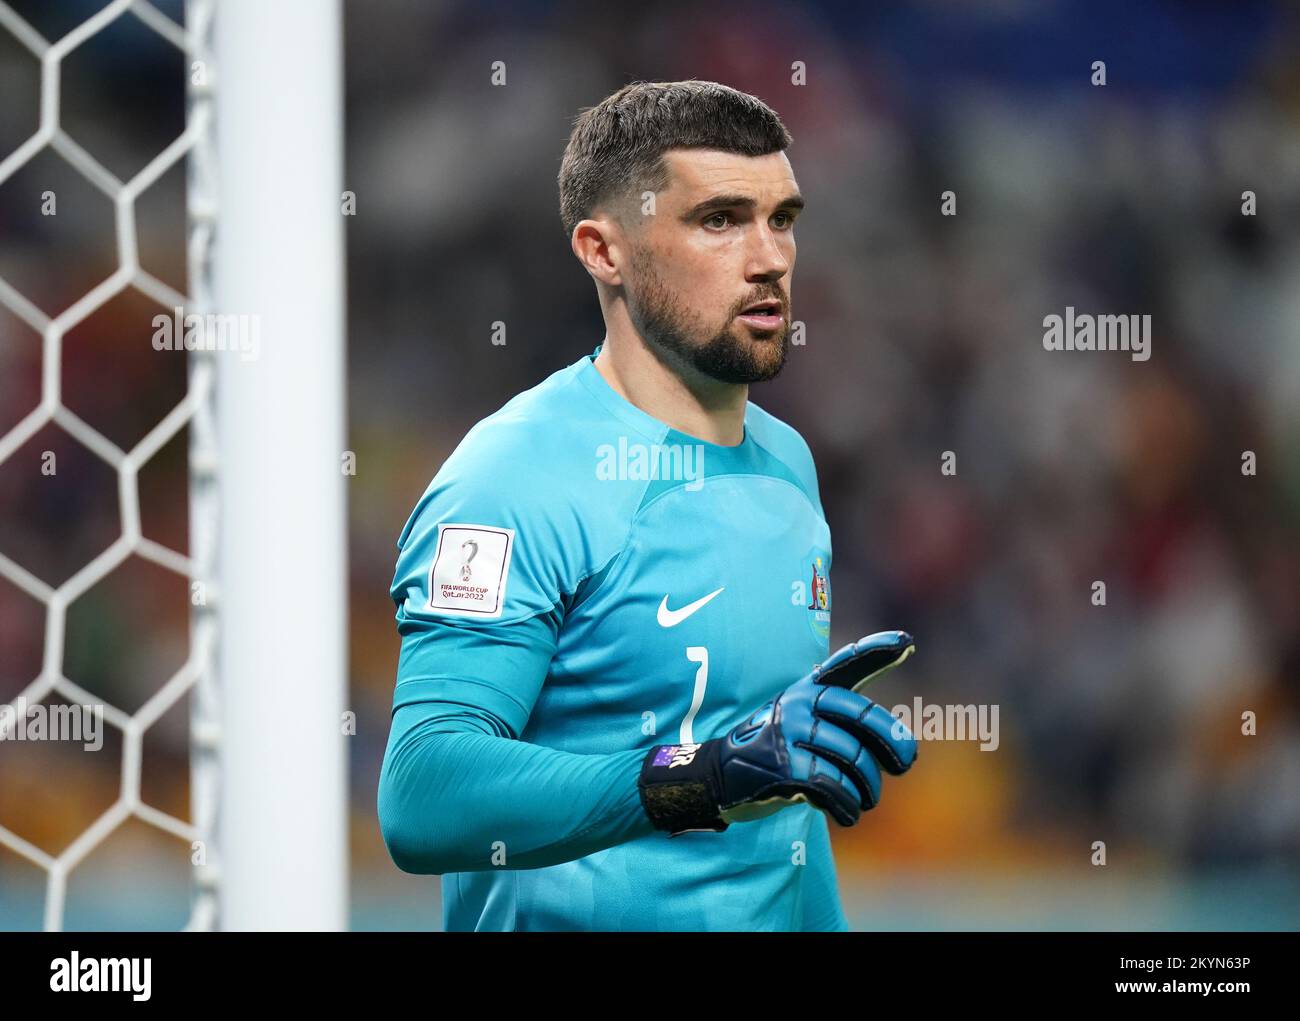 Australia goalkeeper Mathew Ryan during the FIFA World Cup Group D match at the Al Janoub Stadium in Al Wakrah, Qatar. Picture date: Wednesday November 30, 2022. Stock Photo